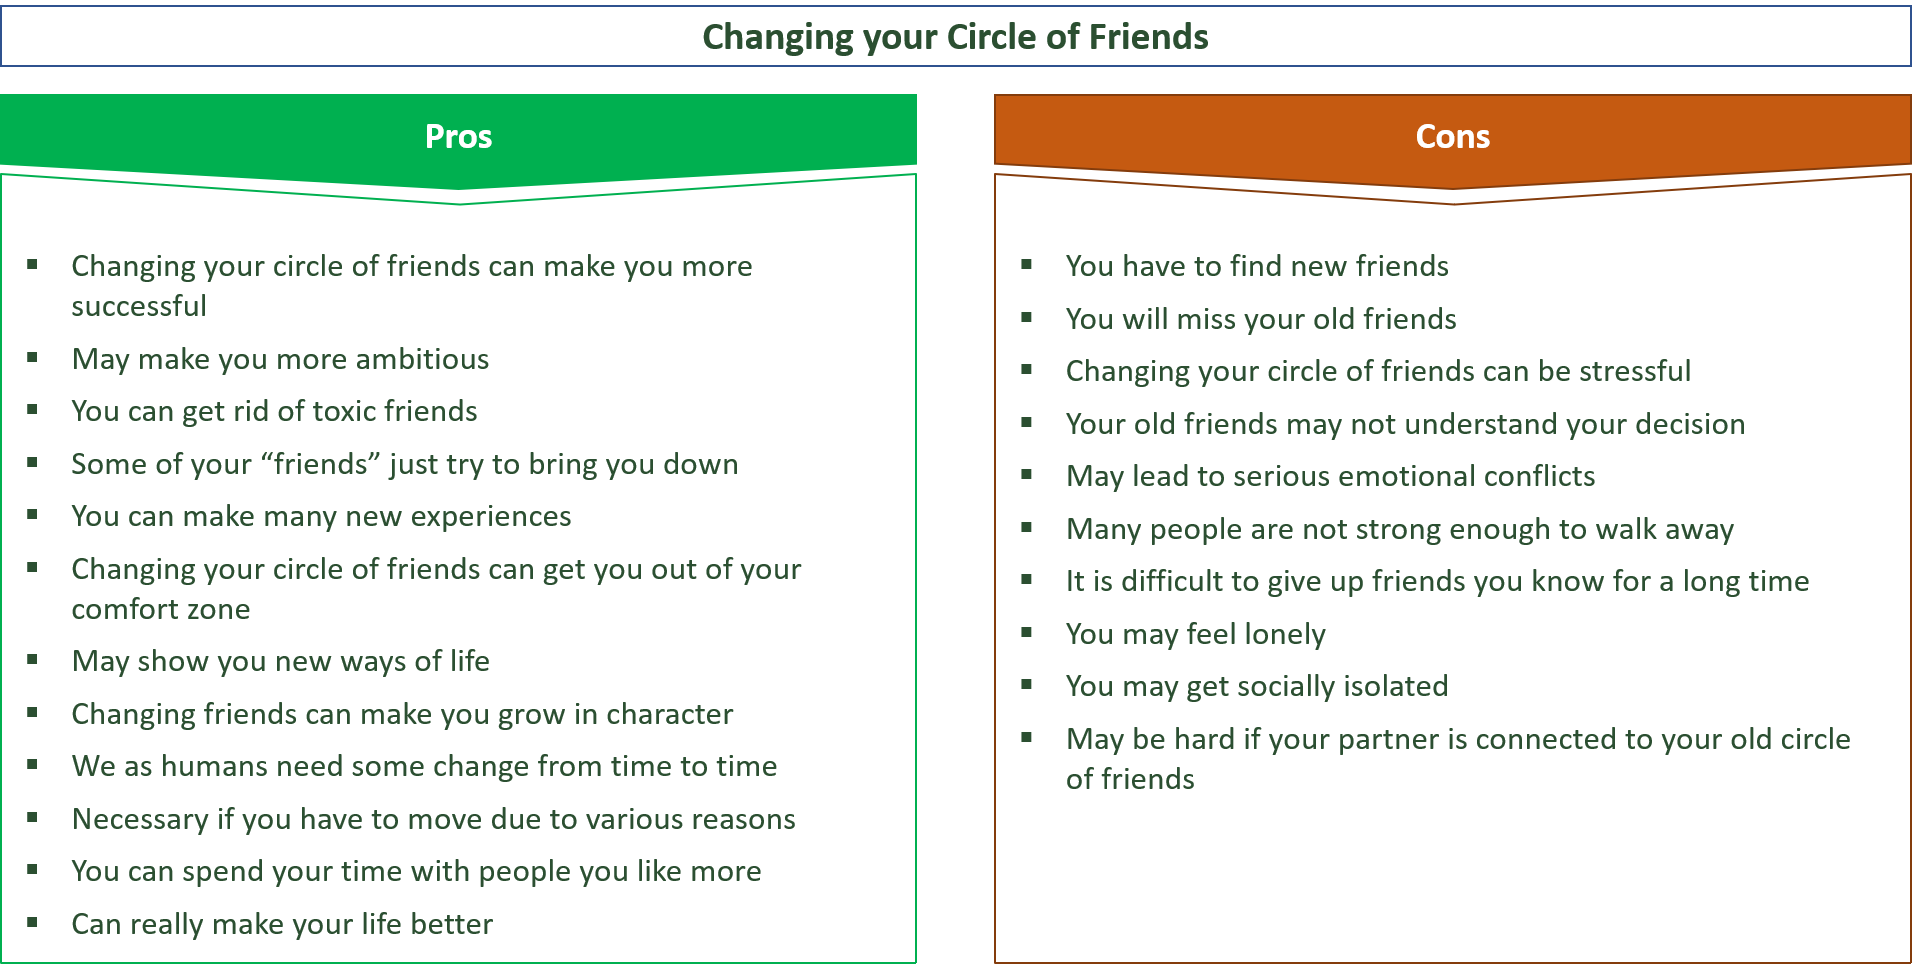 advantages and disadvantages of changing your circle of friends